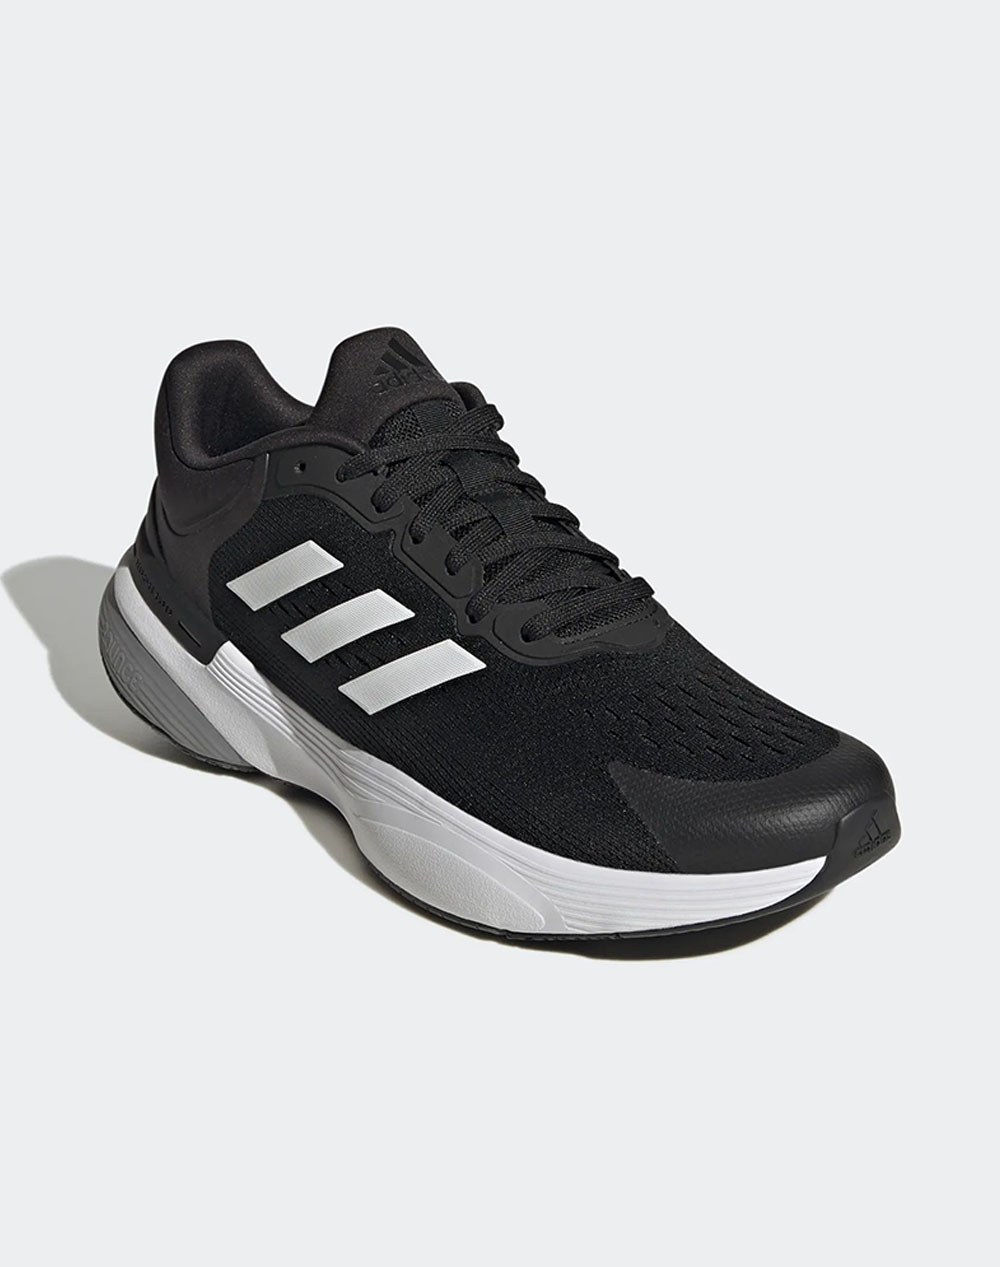 ADIDAS RESPONSE SUPER 3.0 SNEAKERS SPORTS